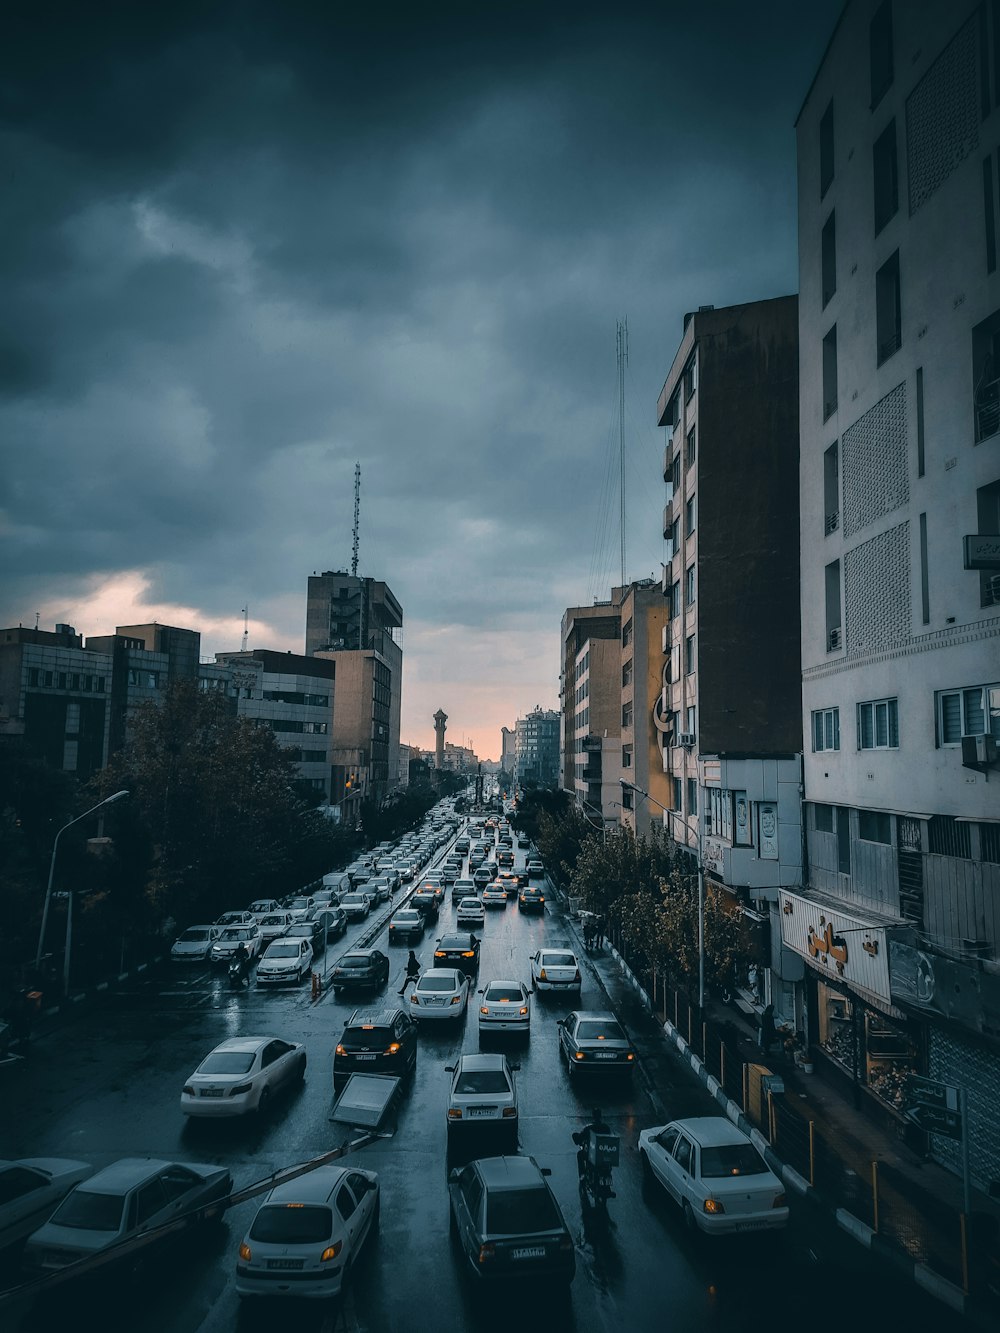 a city street filled with lots of traffic under a cloudy sky